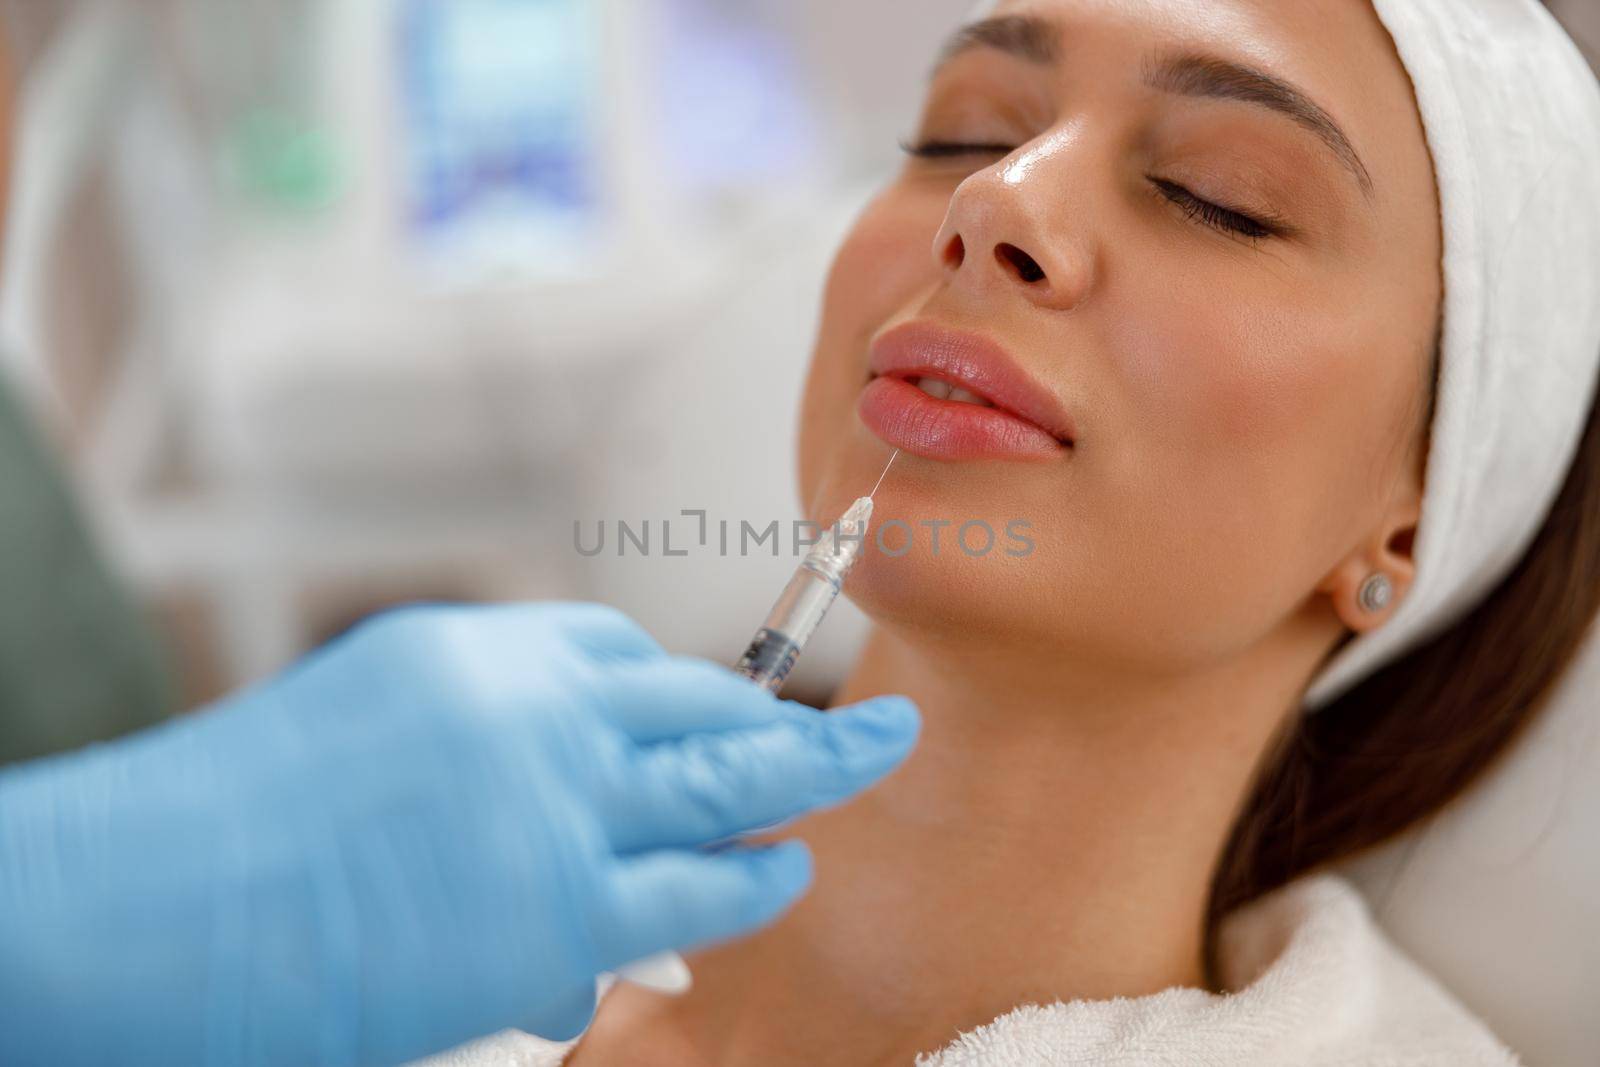 Attractive young woman getting rejuvenating injections in lips at beauty salon by Yaroslav_astakhov